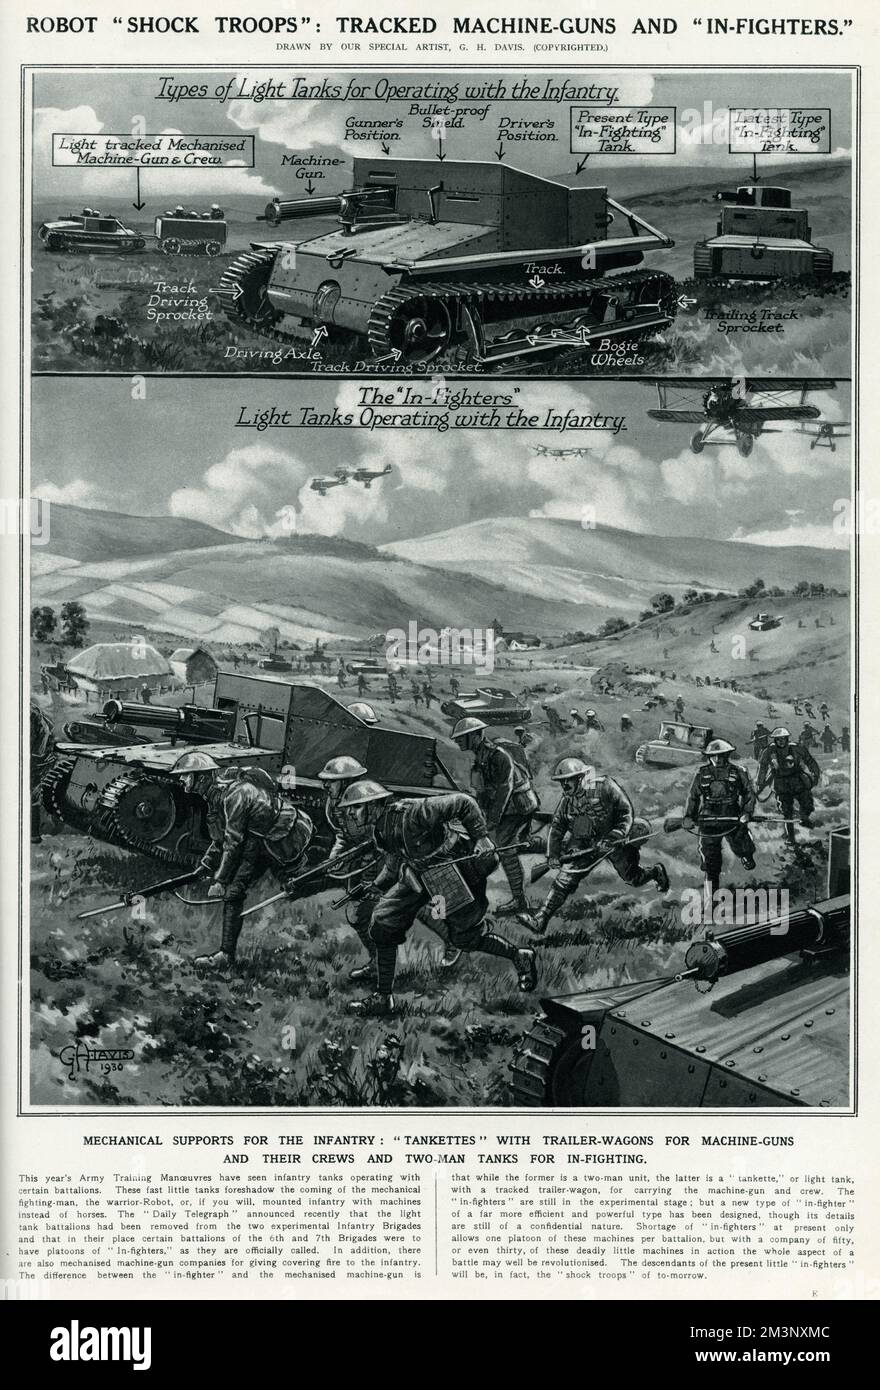 Mechanical supports for the infantry of the British Army as depicted by ILN special diagrammatic artist, G. H. Davis, showing 'tankettes' with trailer wagons for transporting machine-guns together with crews on foot and two-man tanks for in-fighting.  Designed to be agile and be the 'shock troops' of tomorrow (this in 1930), the platoons of in-fighters were offiically attached to battalions of the 6th and 7th Brigades.  1930 Stock Photo